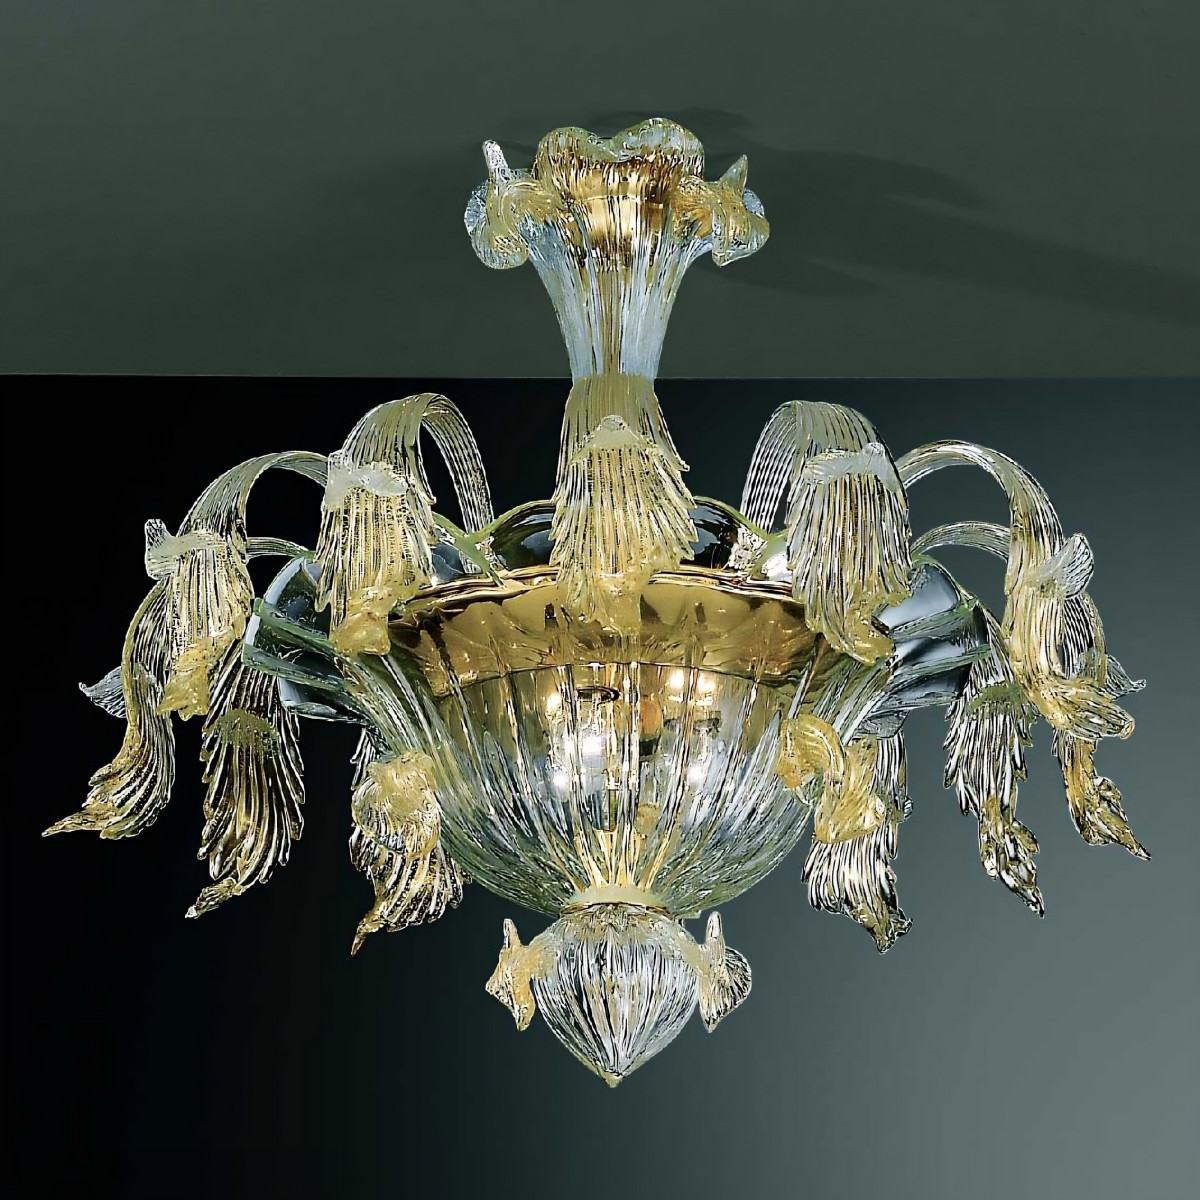 Accademia 6 lights Murano ceiling light - transparent gold color